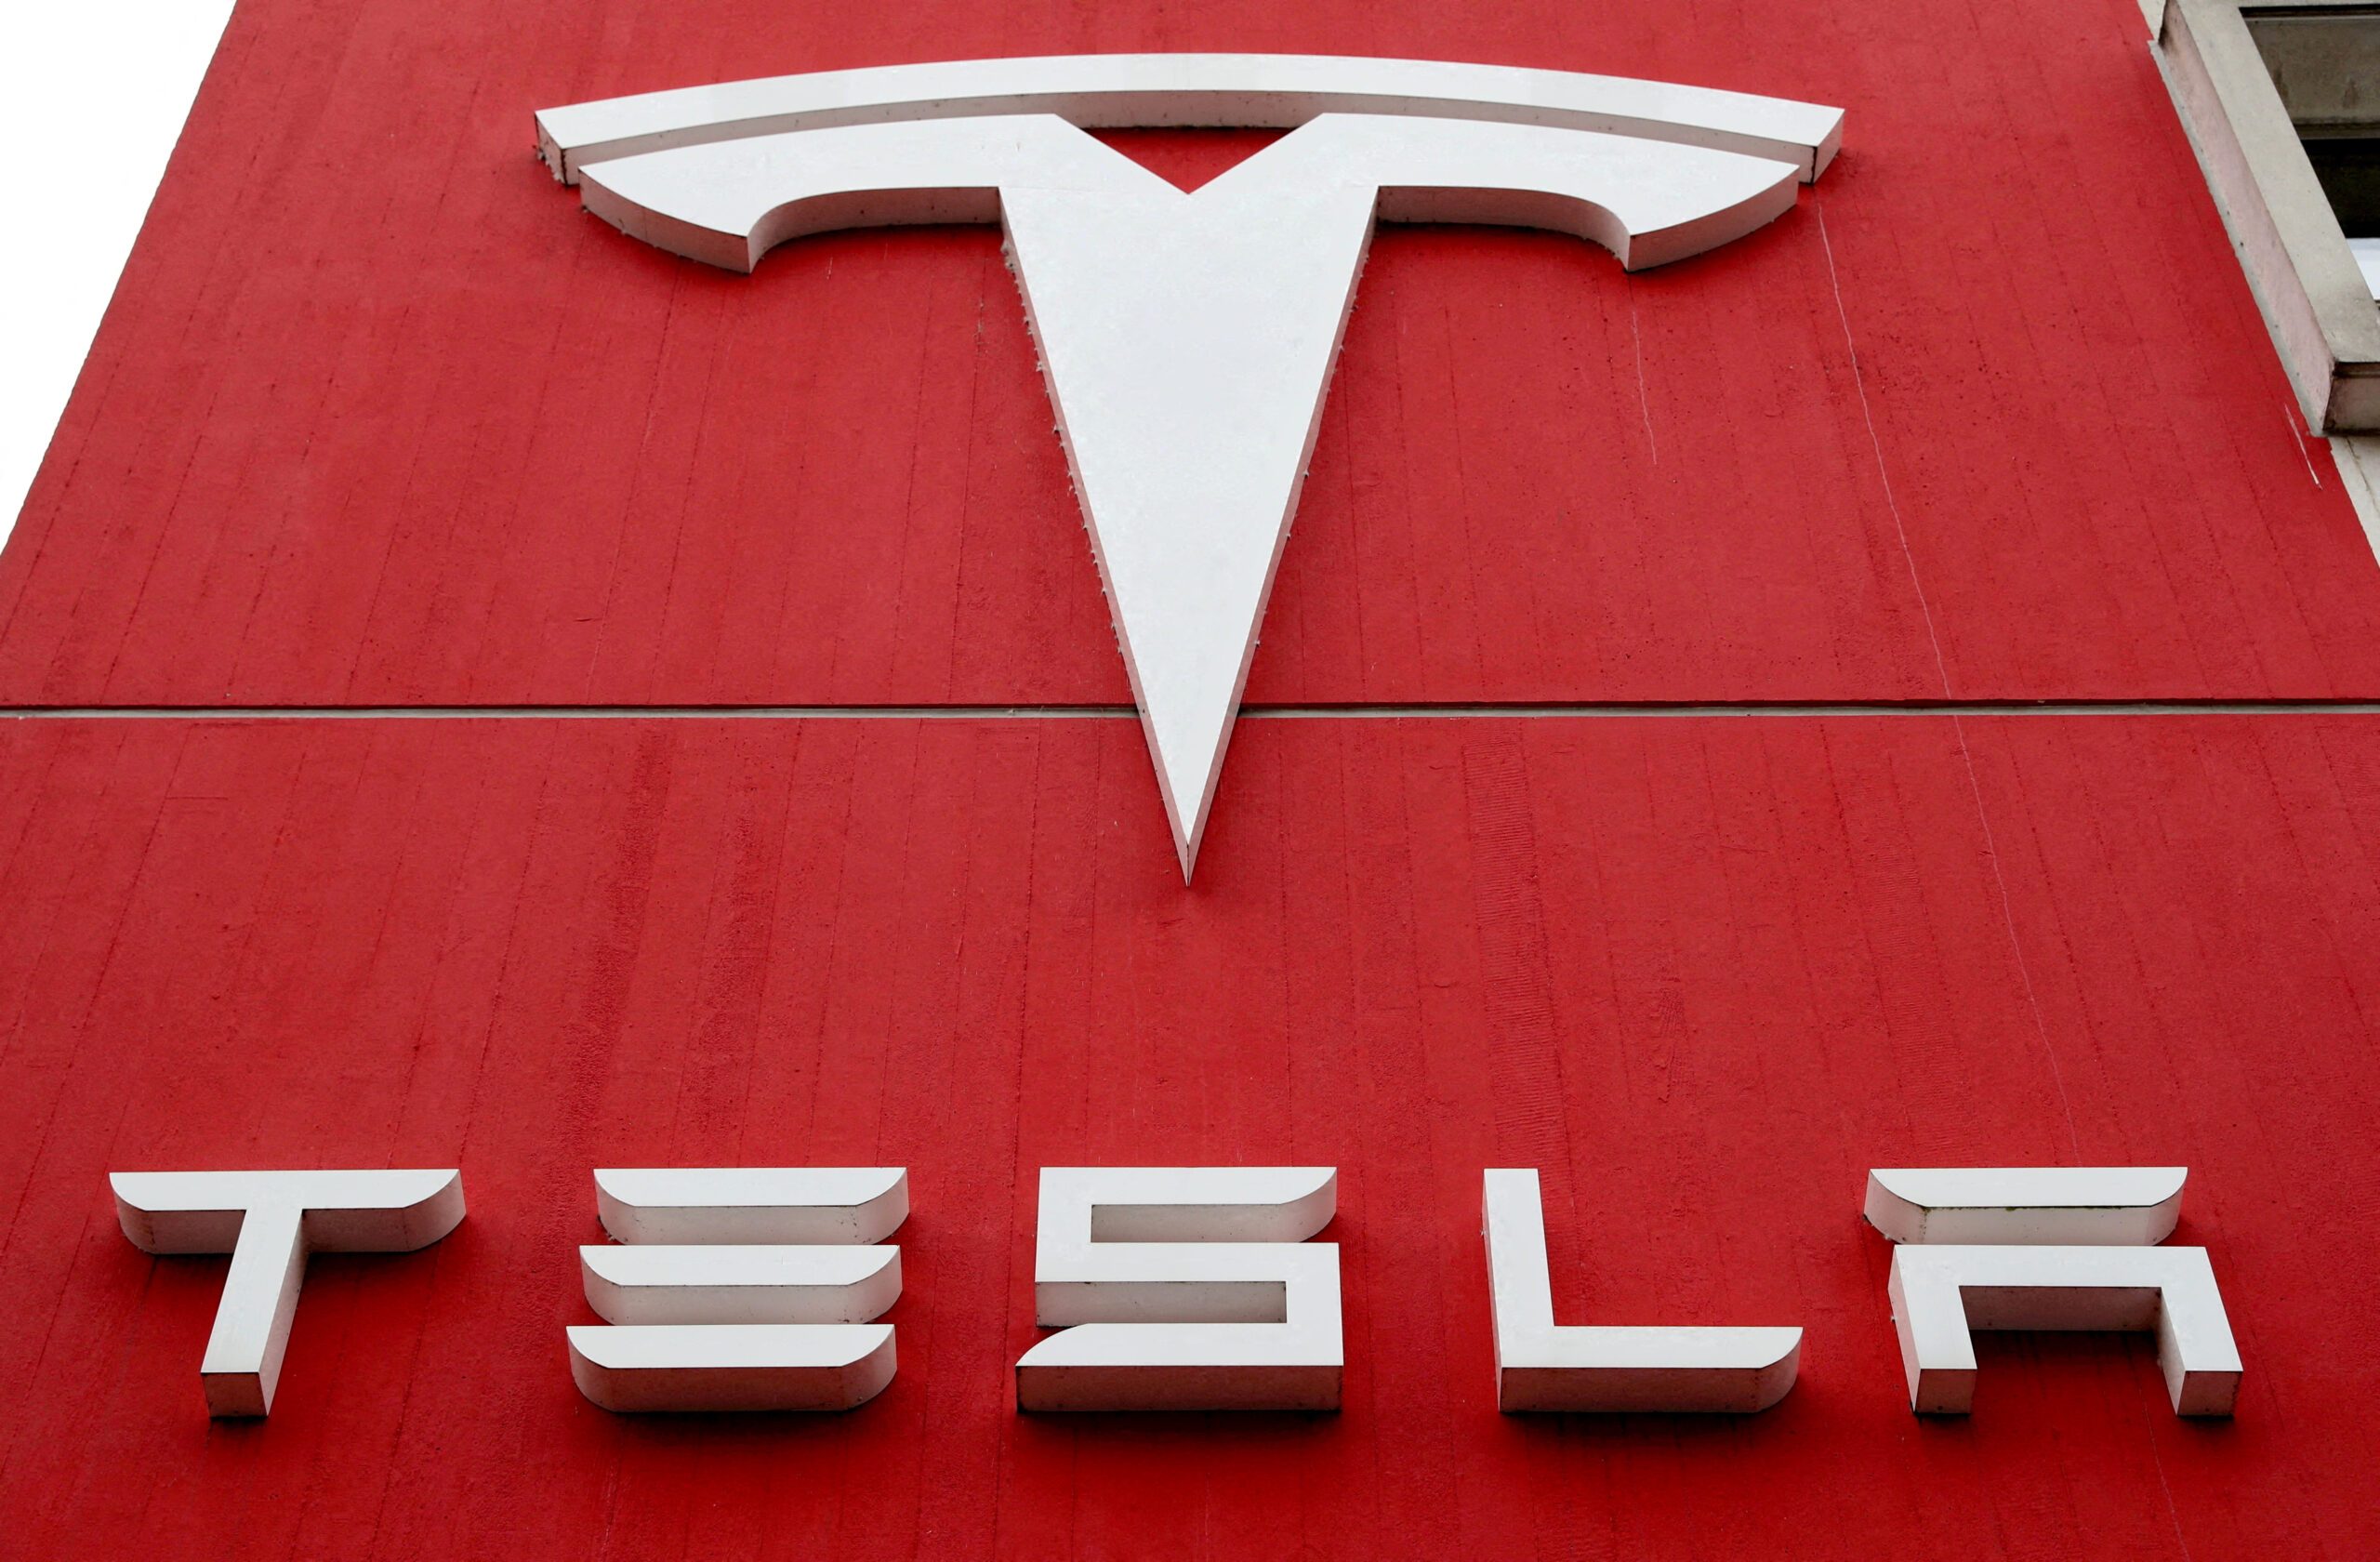 Indonesia says Tesla plans to invest in battery material facility